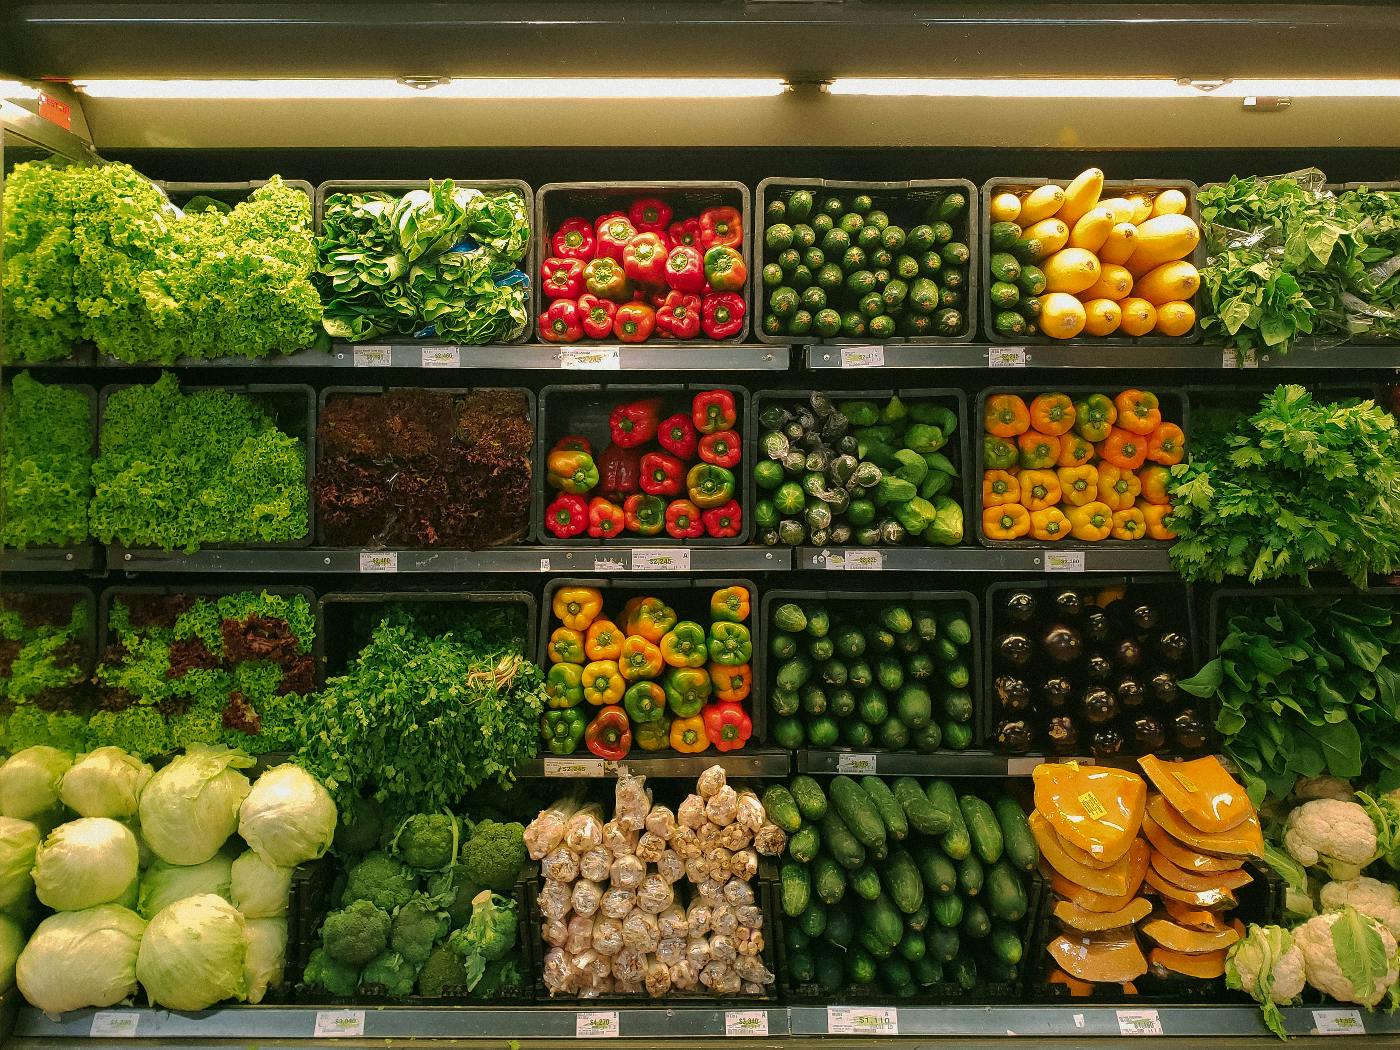 Shelves of milk crates filled with organic vegetables